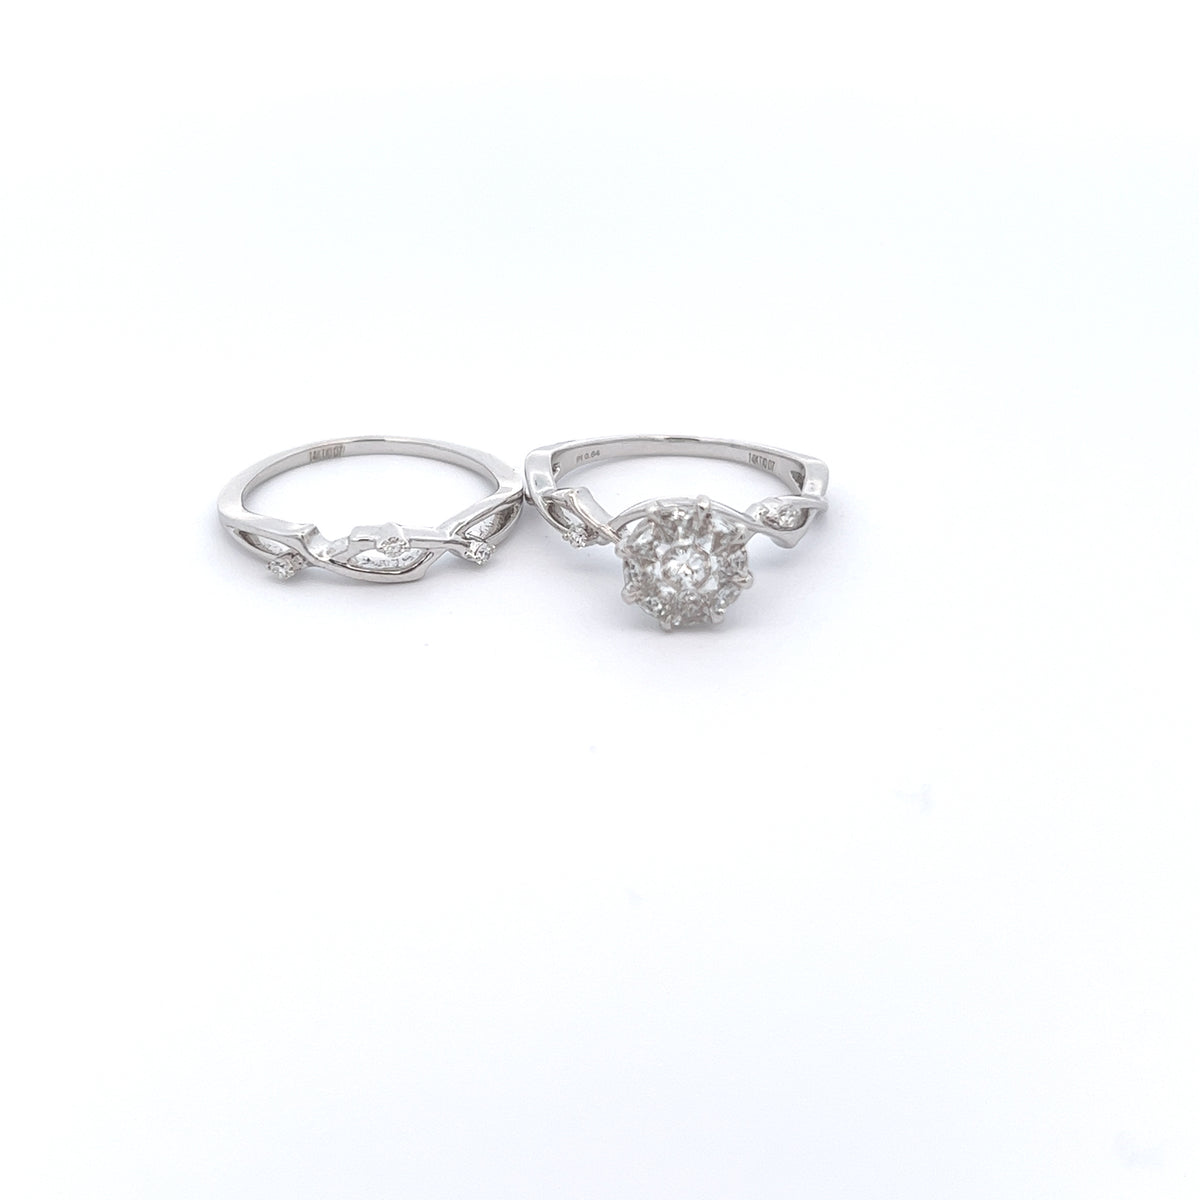 Two Looks, One Ring: 14k White Gold Convertible Diamond Ring